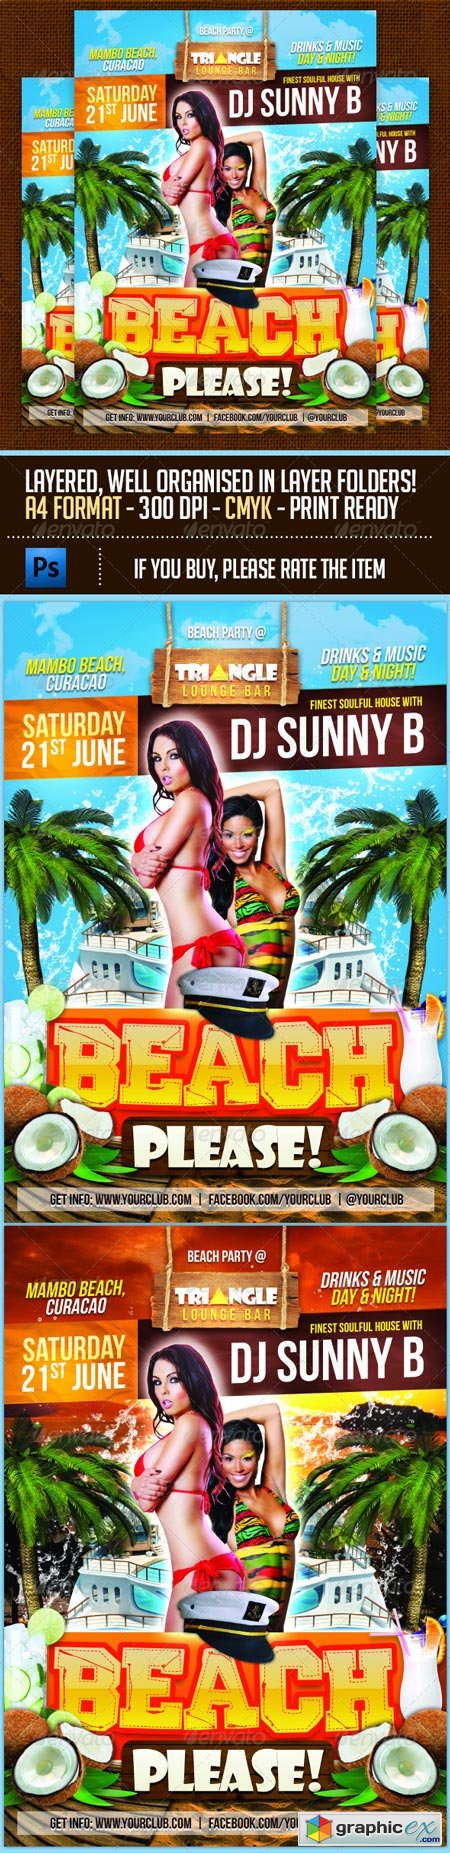 Beach Please Party Flyer Template 6897984